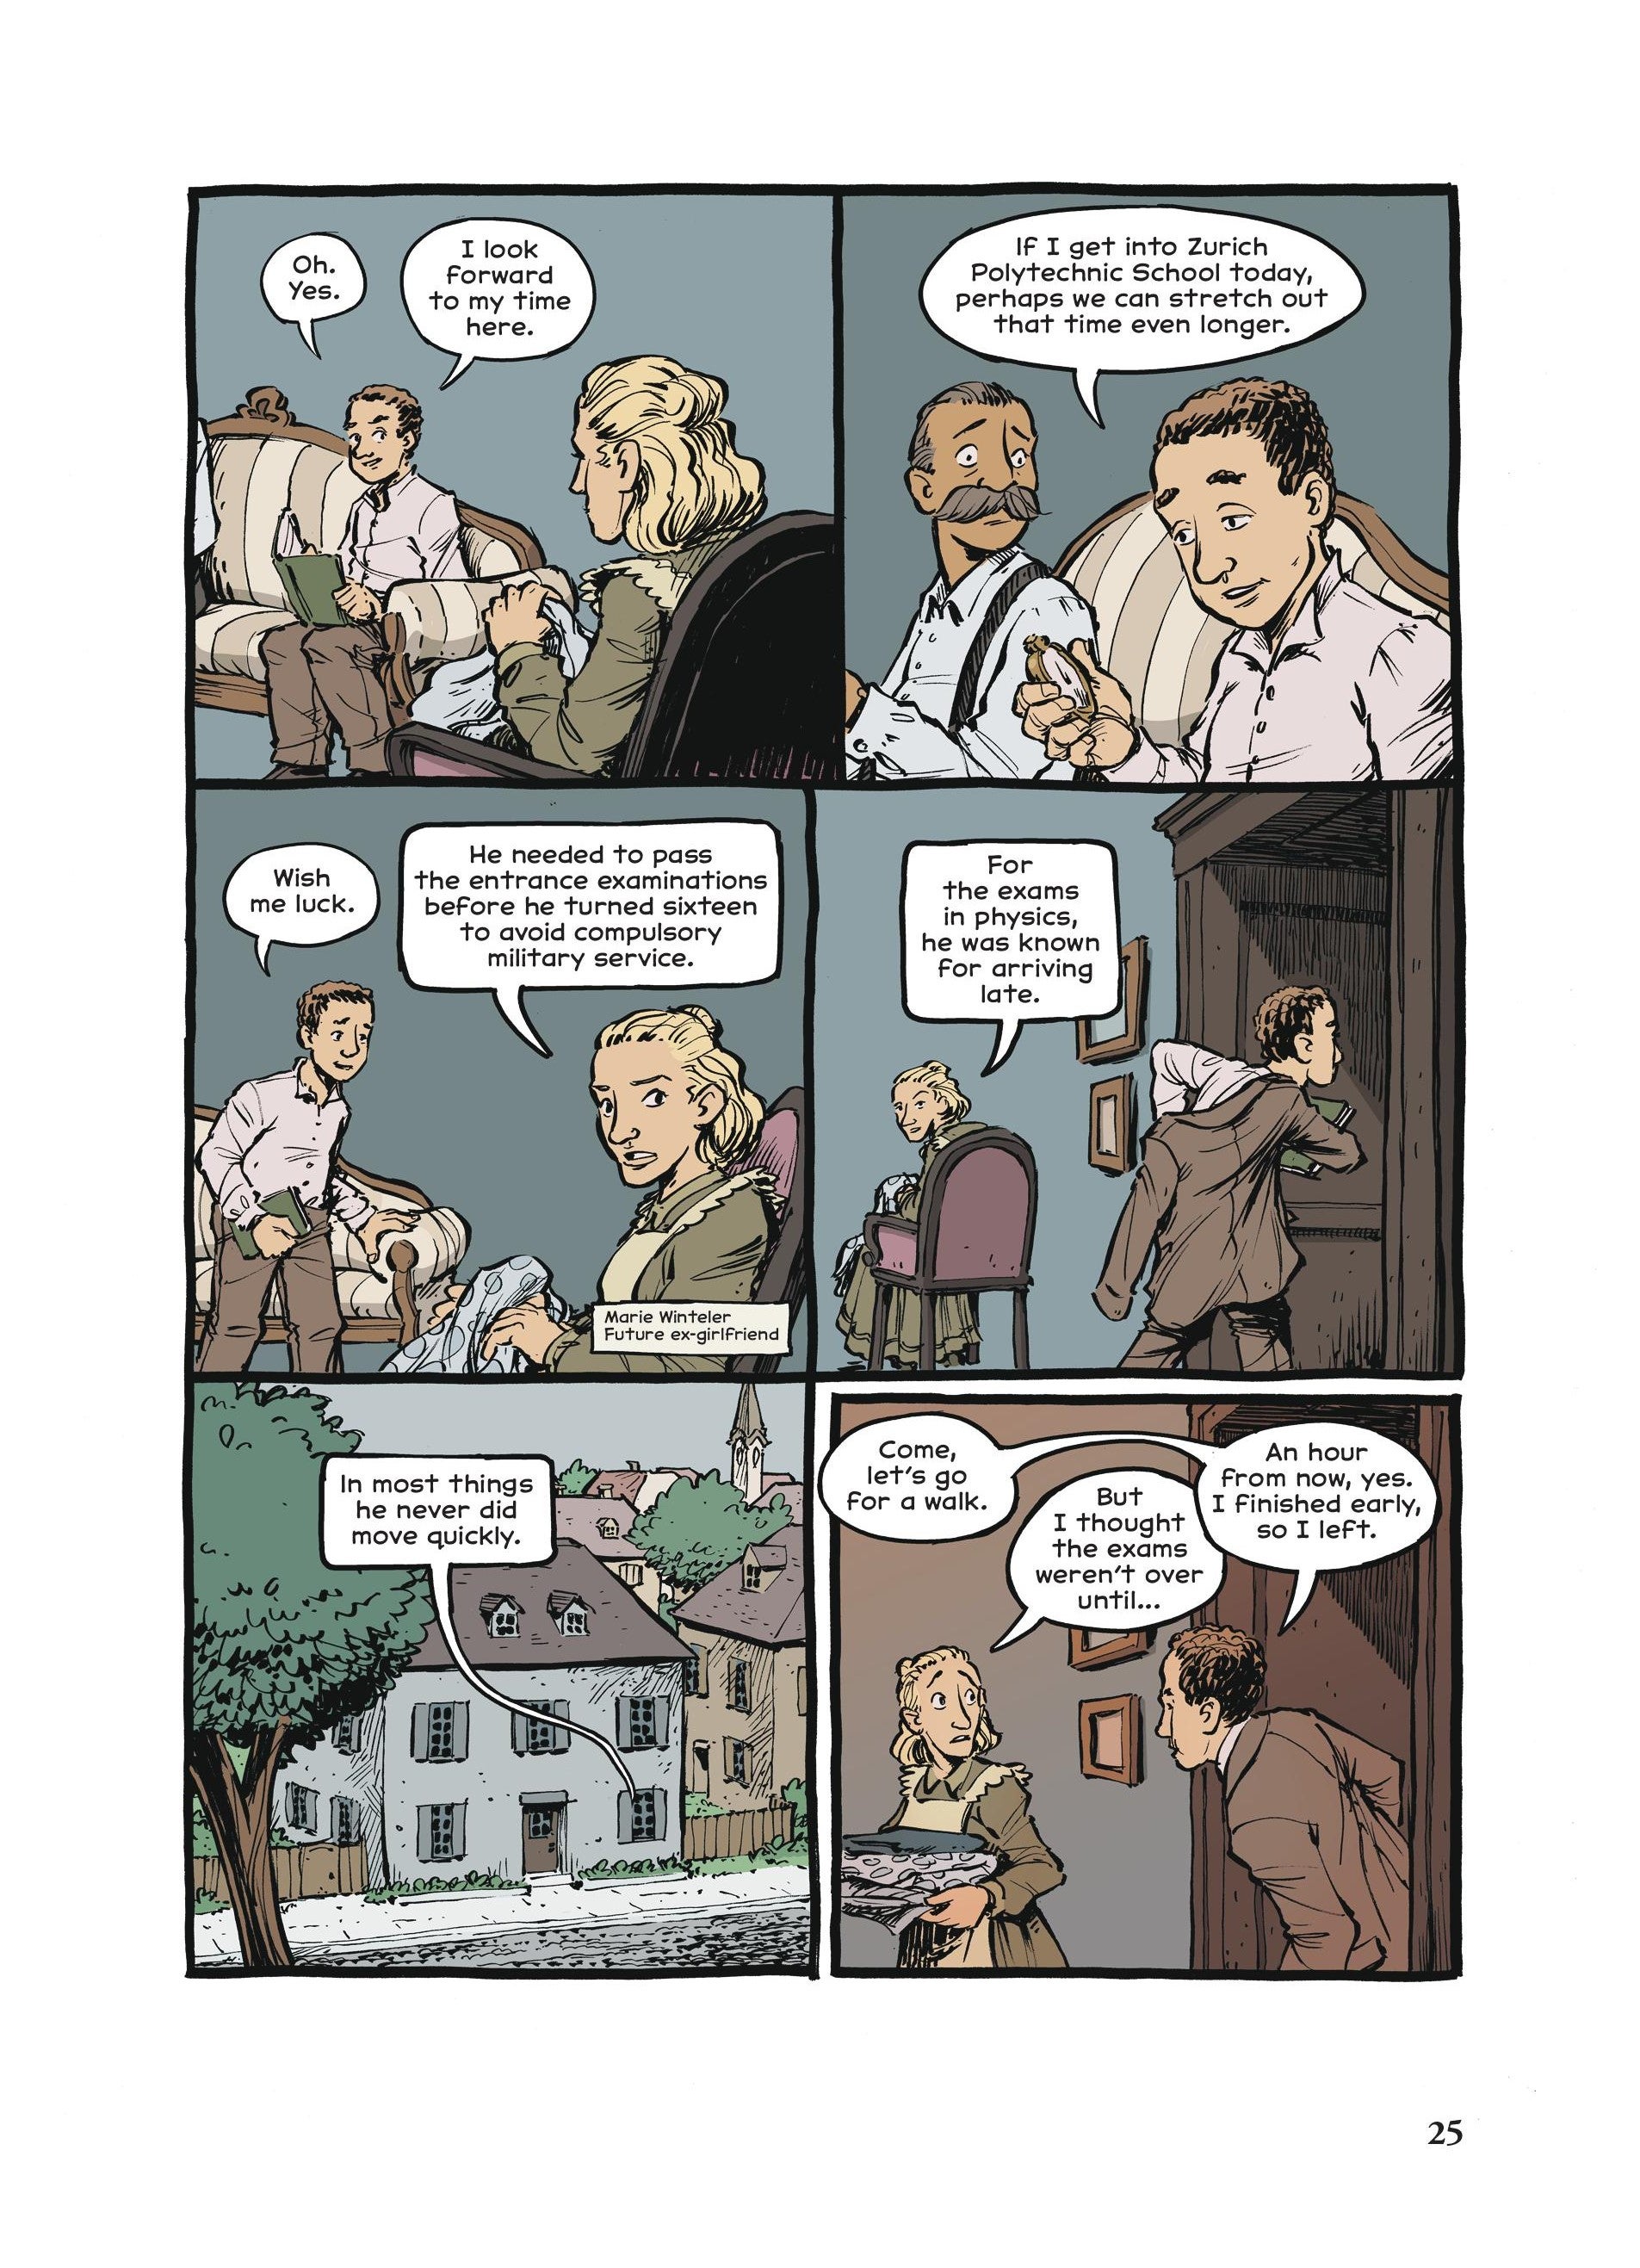 Comics page featuring Einstein talking about passing a test, arriving late, and leaving early